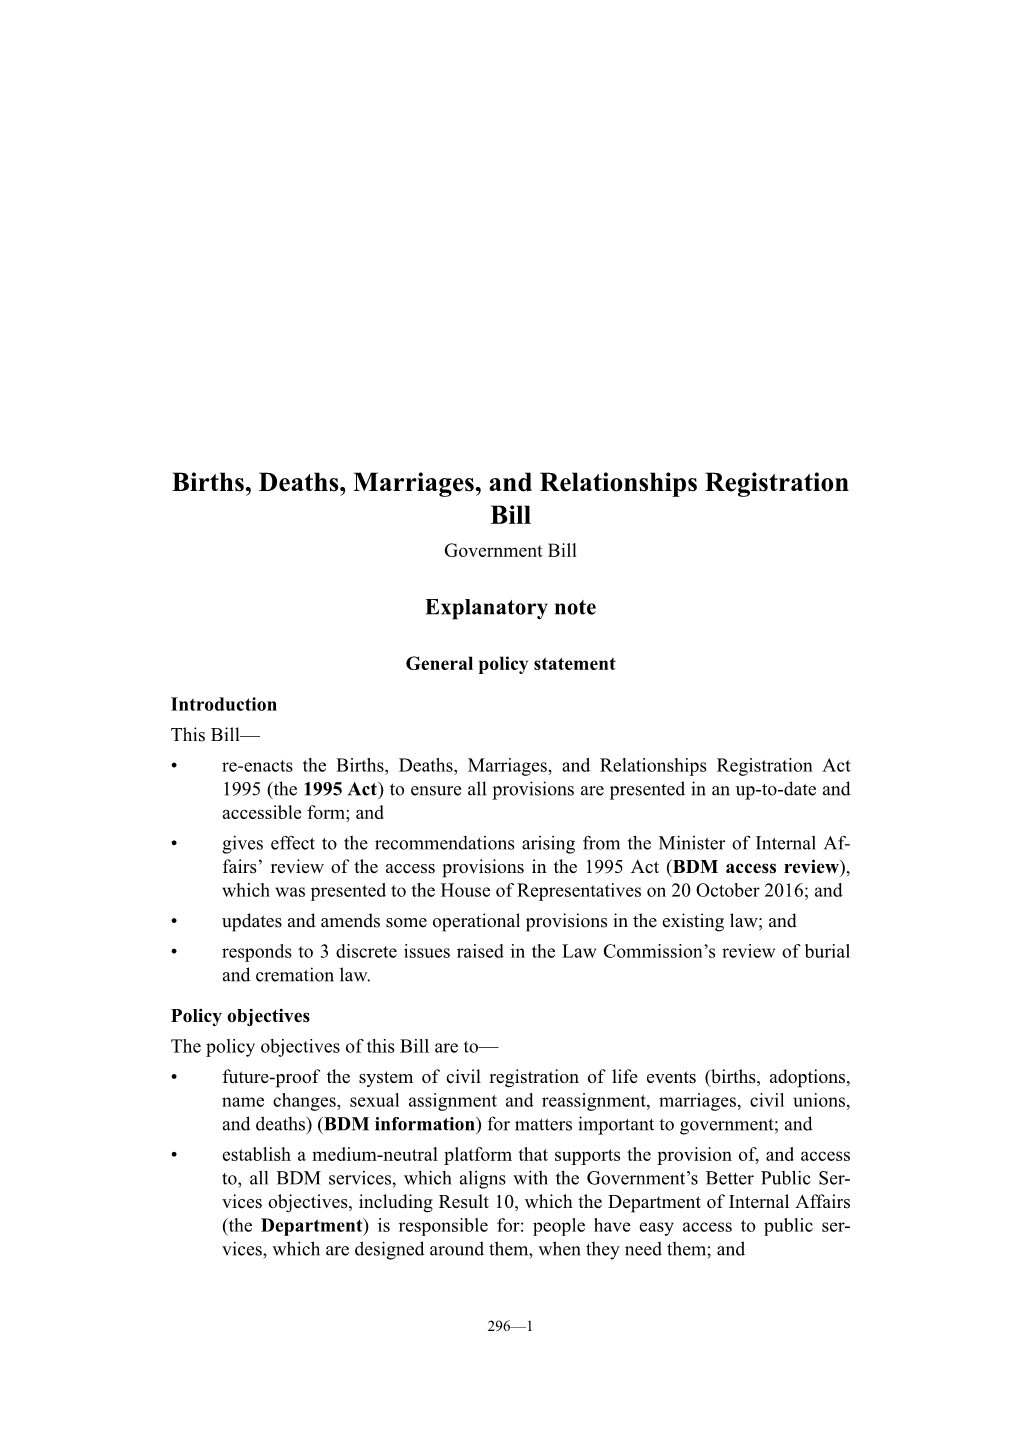 Births, Deaths, Marriages, and Relationships Registration Bill Government Bill